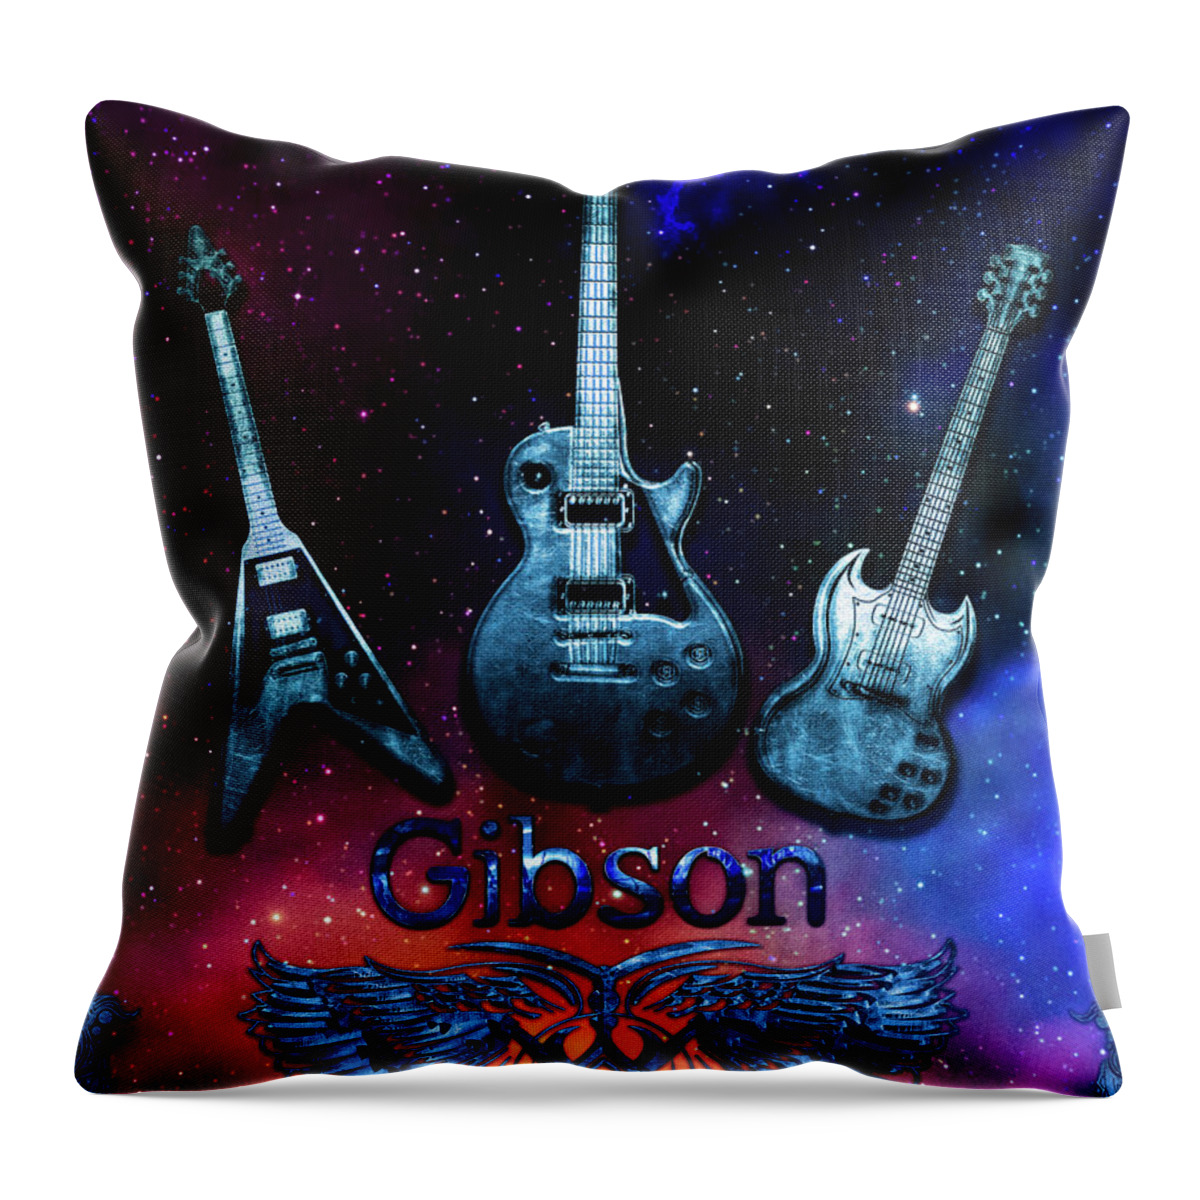 Gibson Throw Pillow featuring the digital art The Gibson Trilogy by Michael Damiani